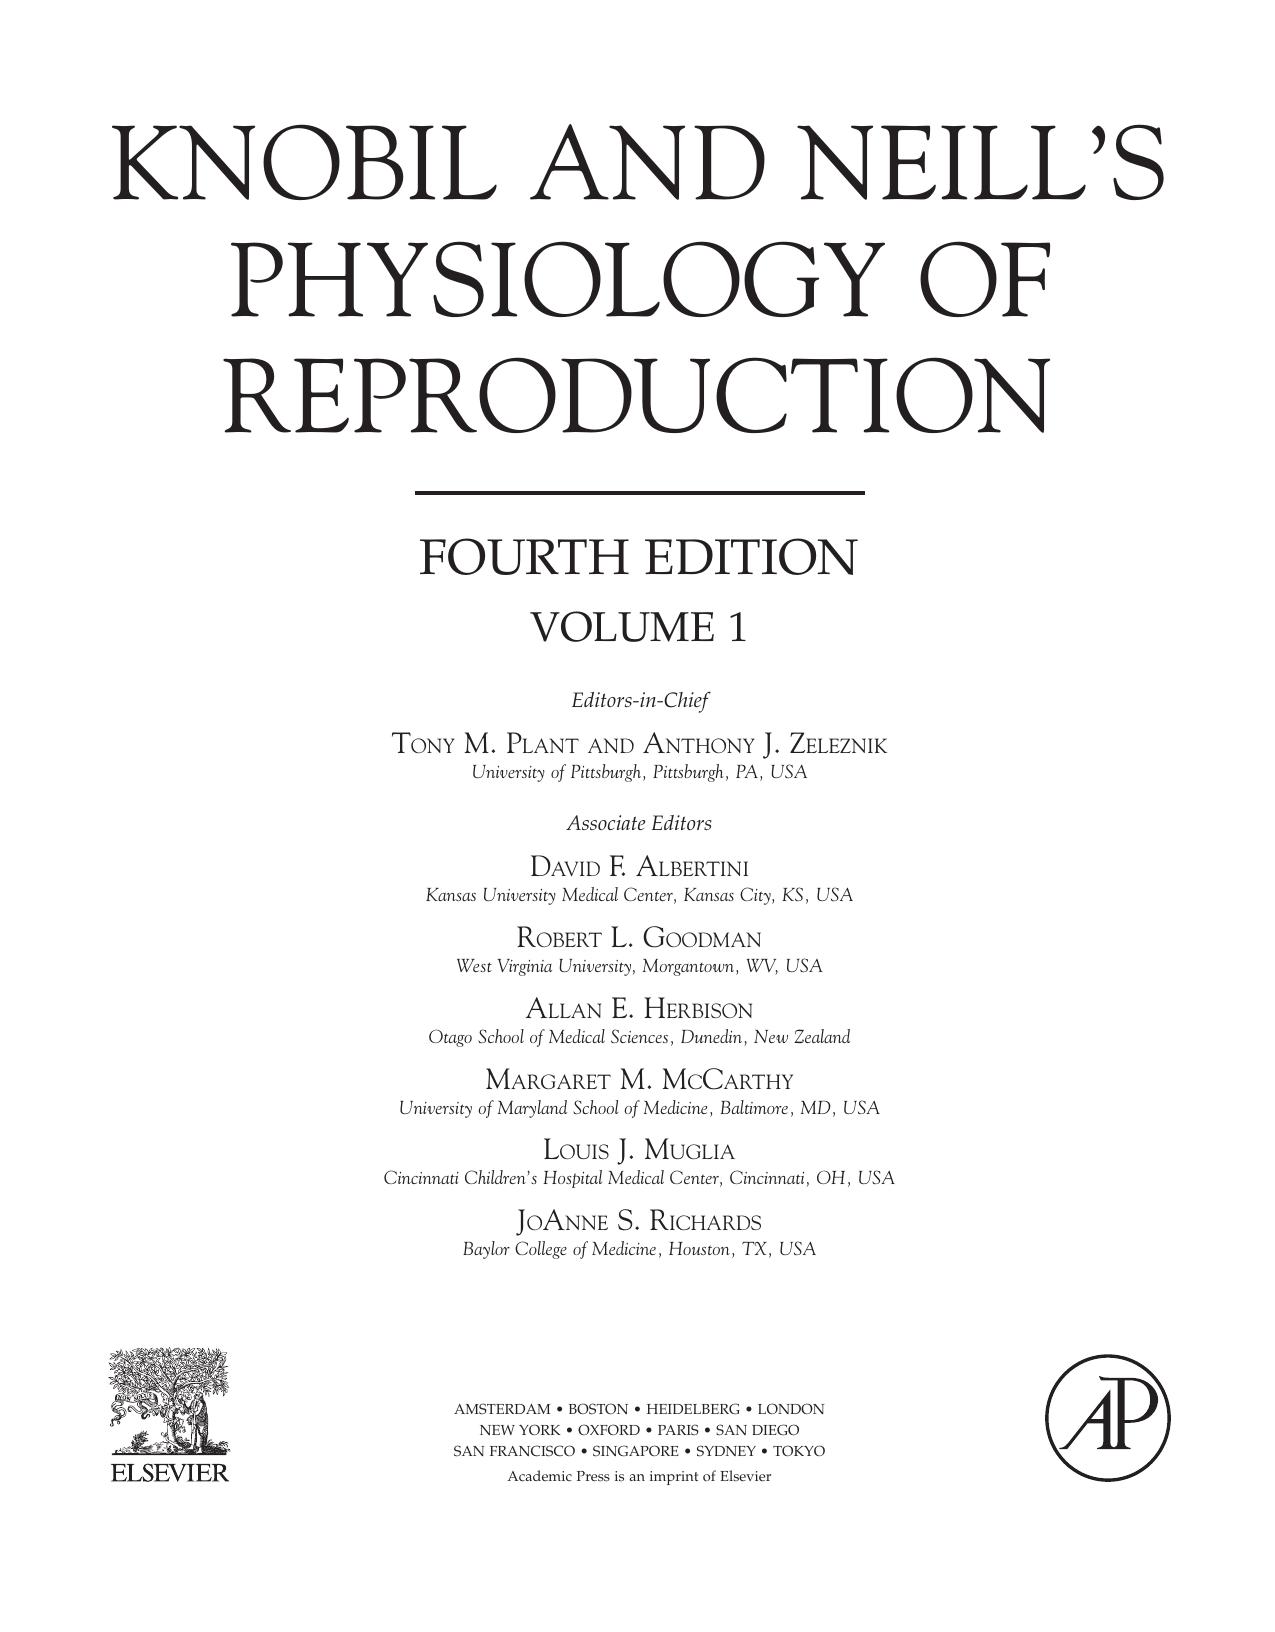 Knobil and Neills Physiology of Reproduction2 2015